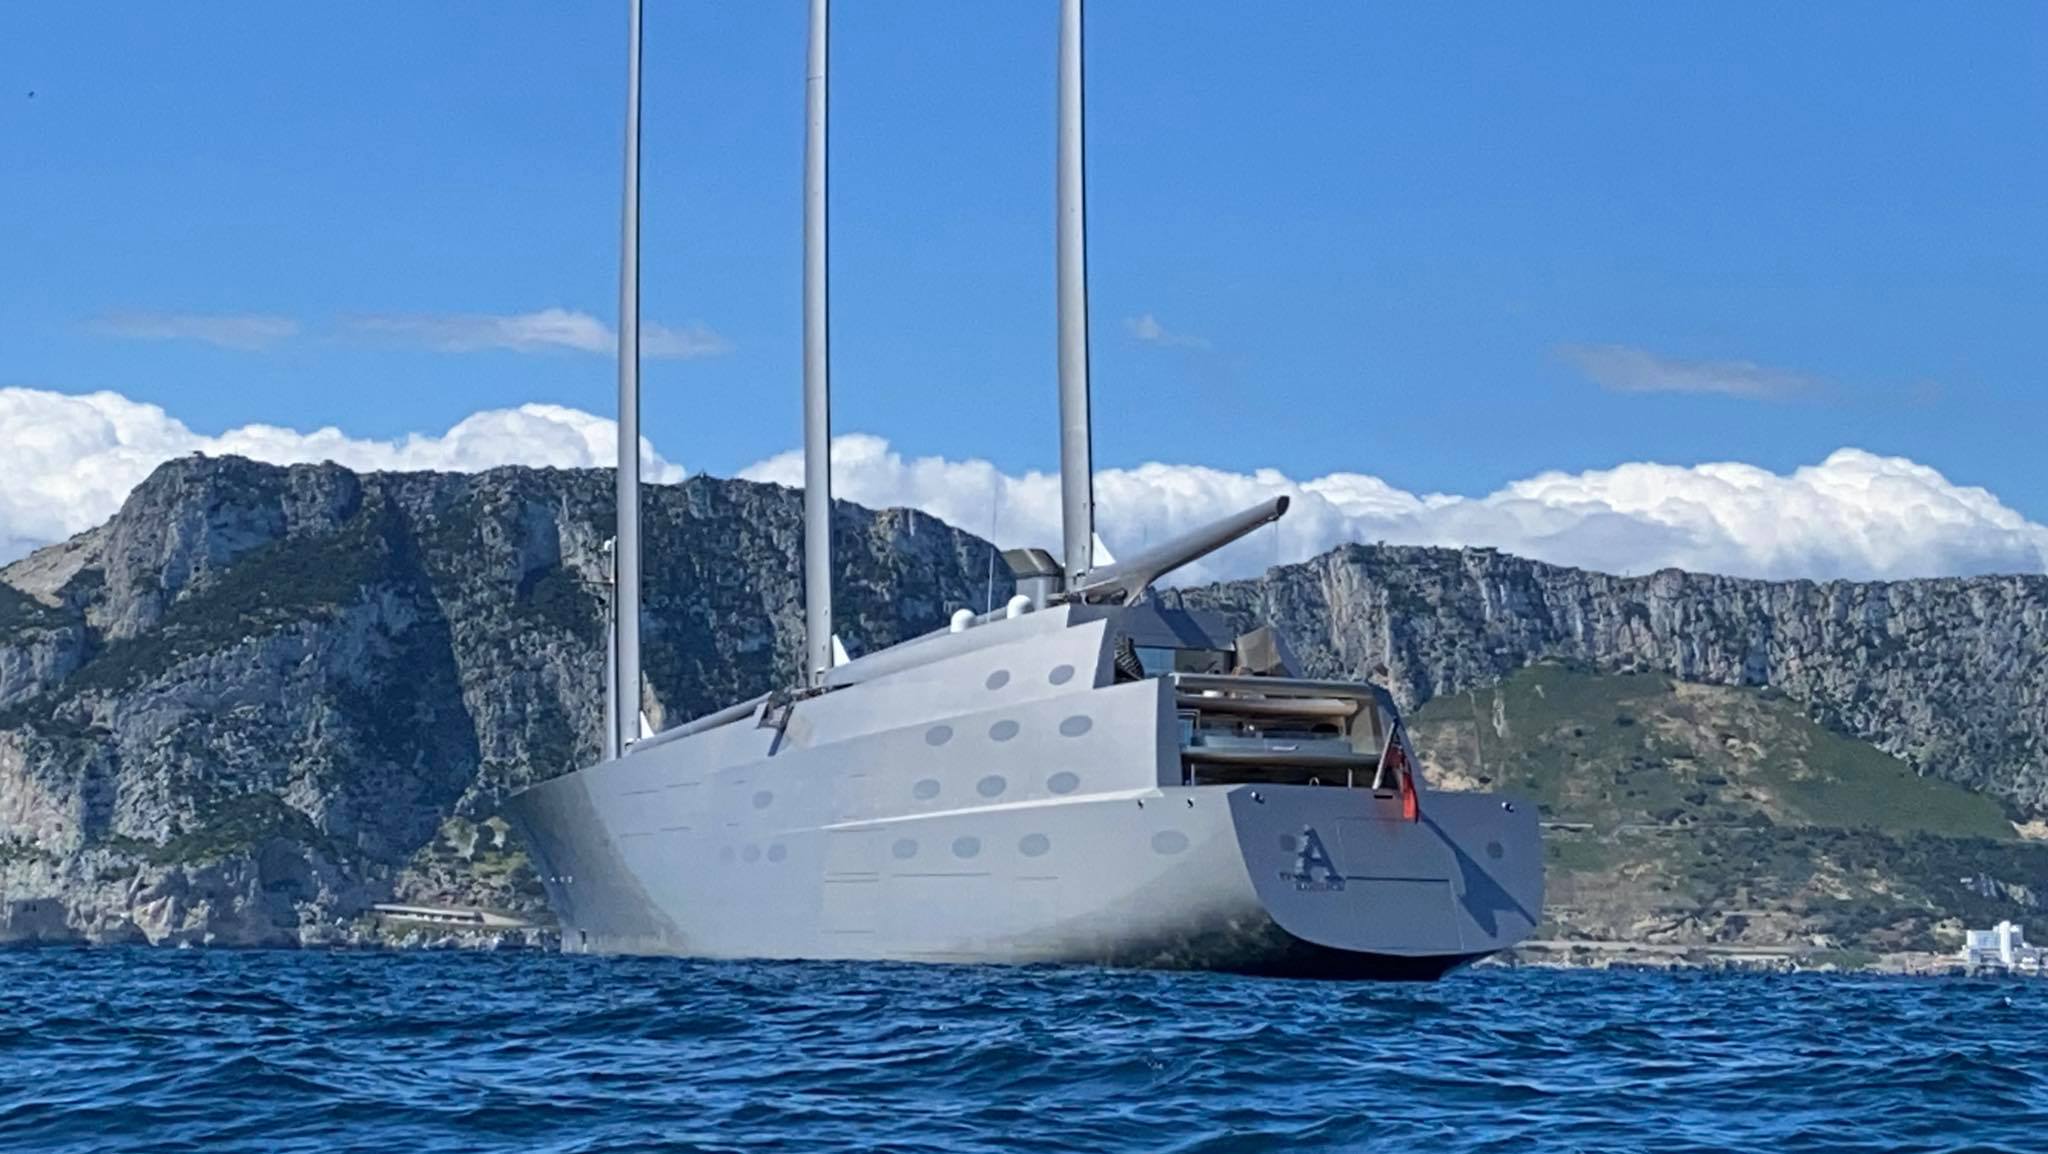 The Mighty Sailing Yacht A arriving in Gibraltar